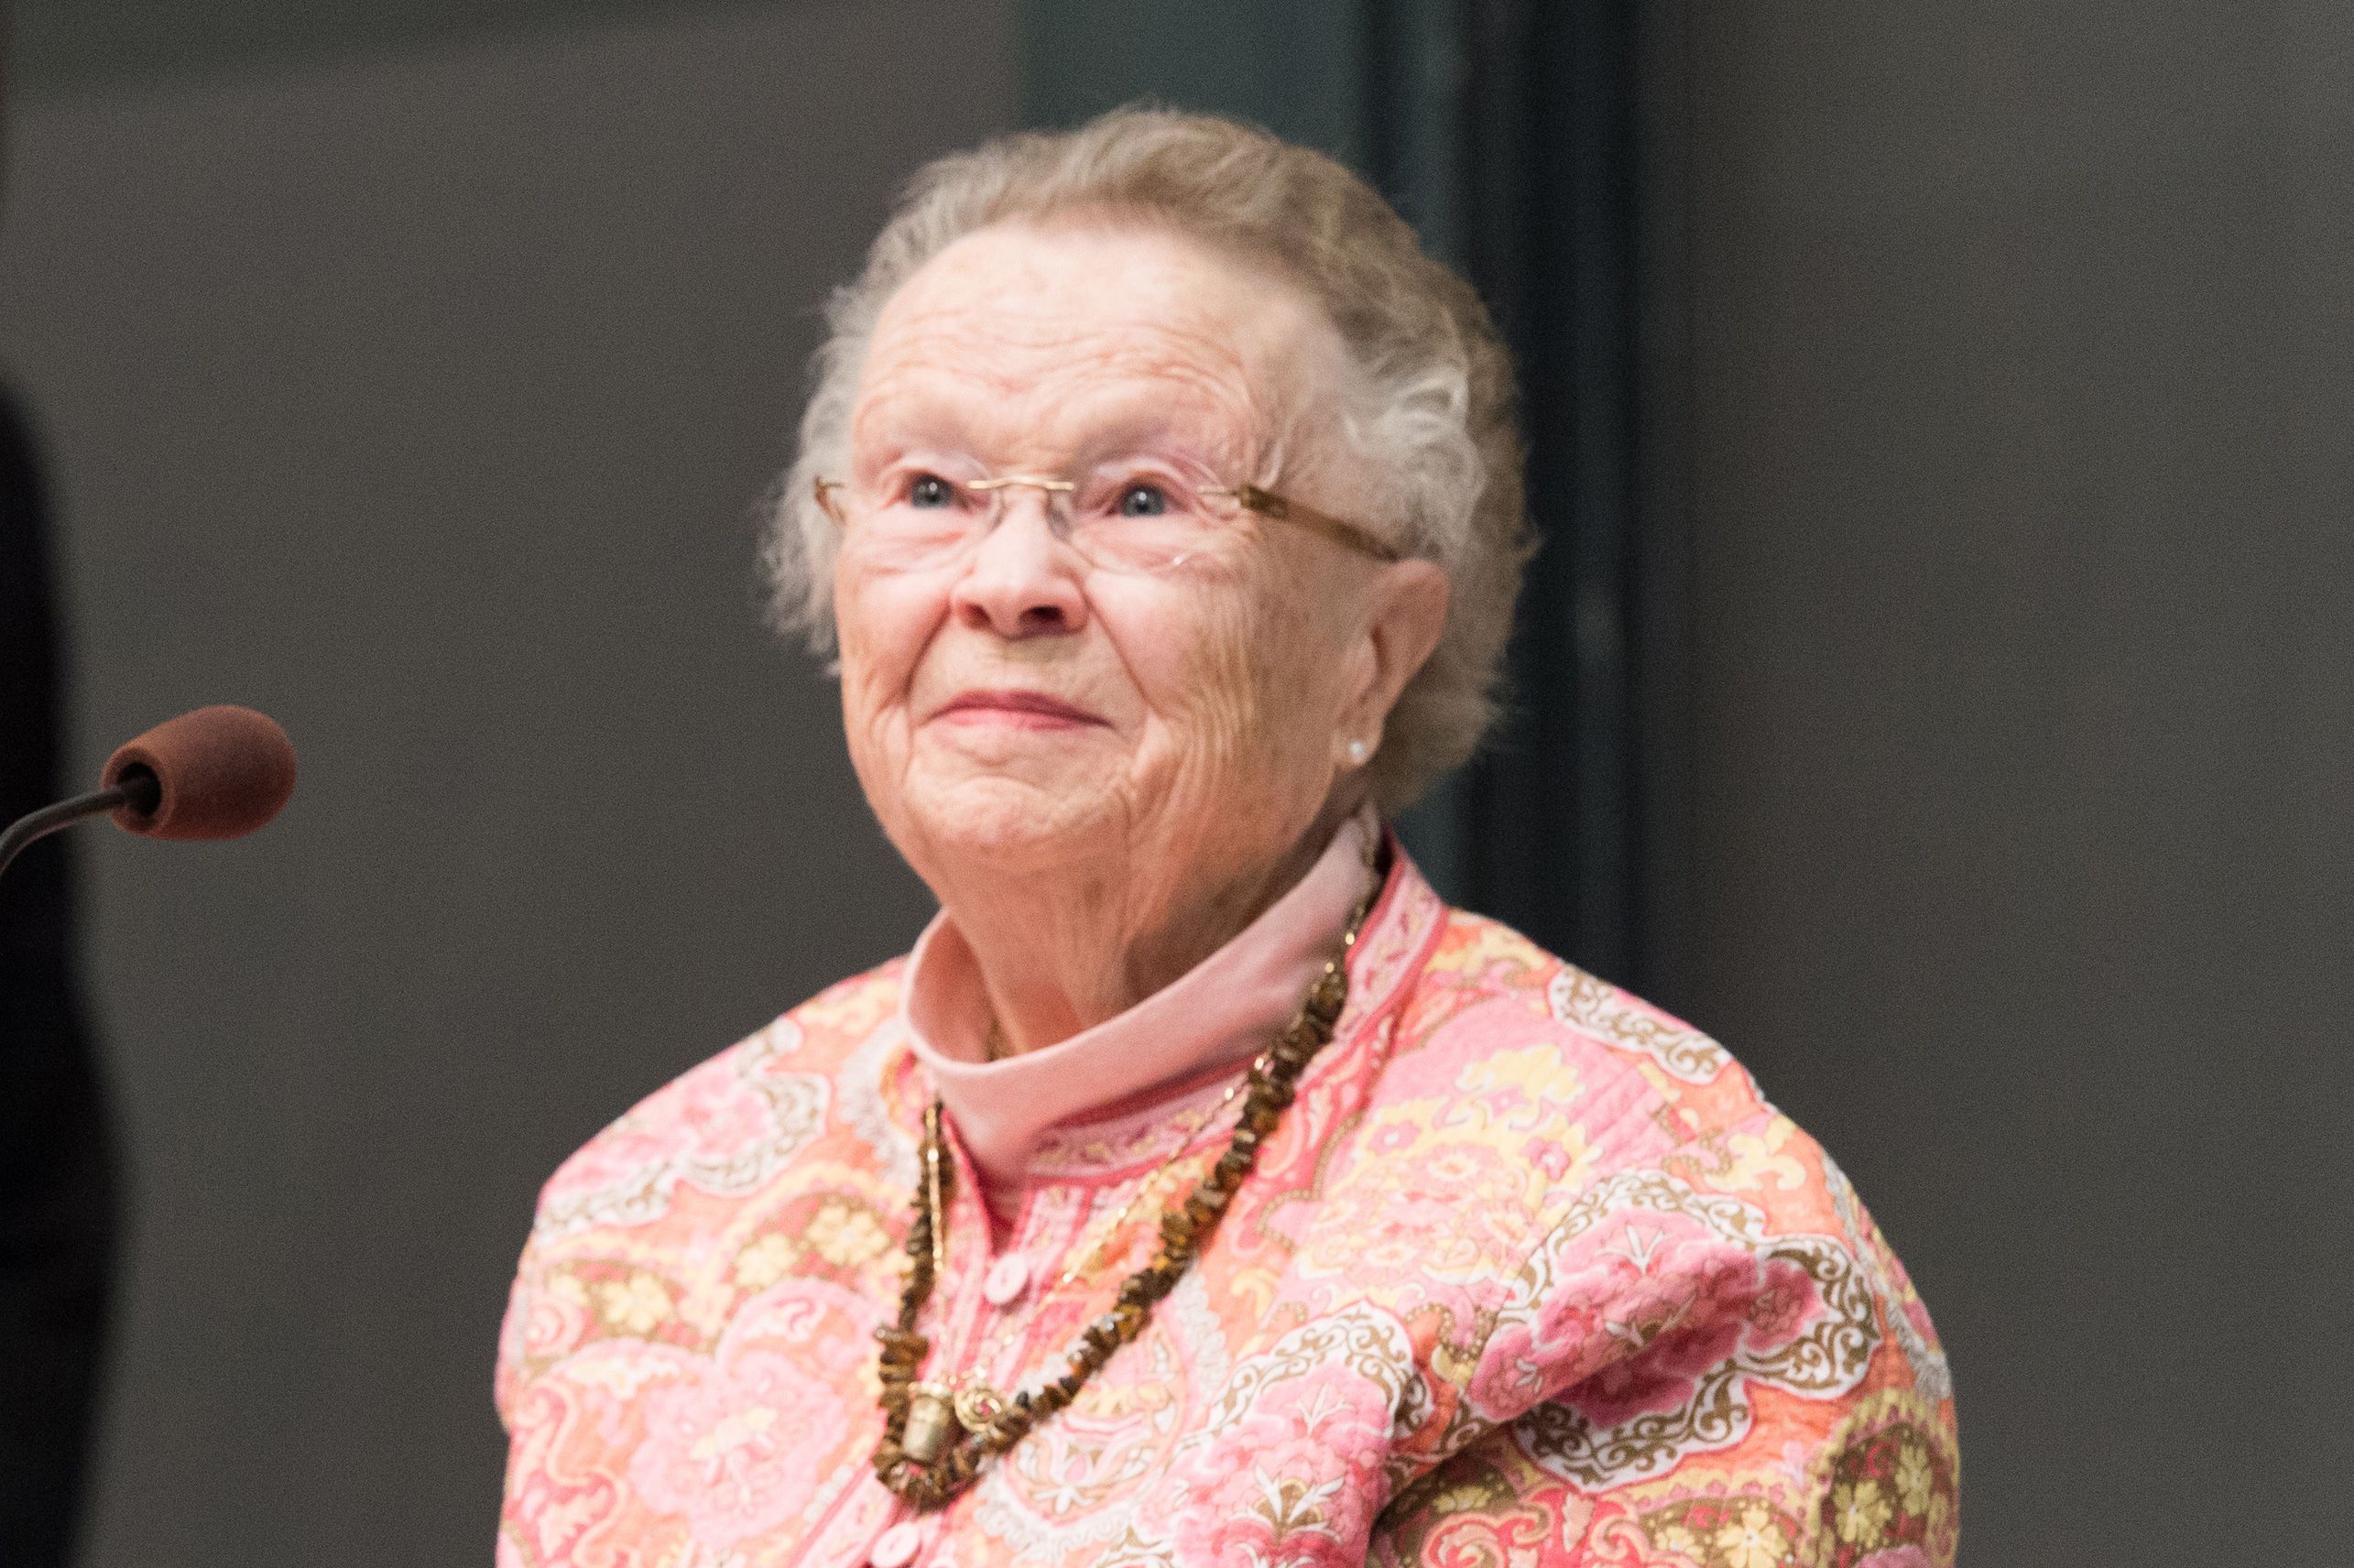 Priscilla King Gray co-founded the MIT Public Service Center — since renamed in her honor as the Priscilla King Gray Public Service Center — and was a champion of public service and a leader in efforts to build community at the Institute.